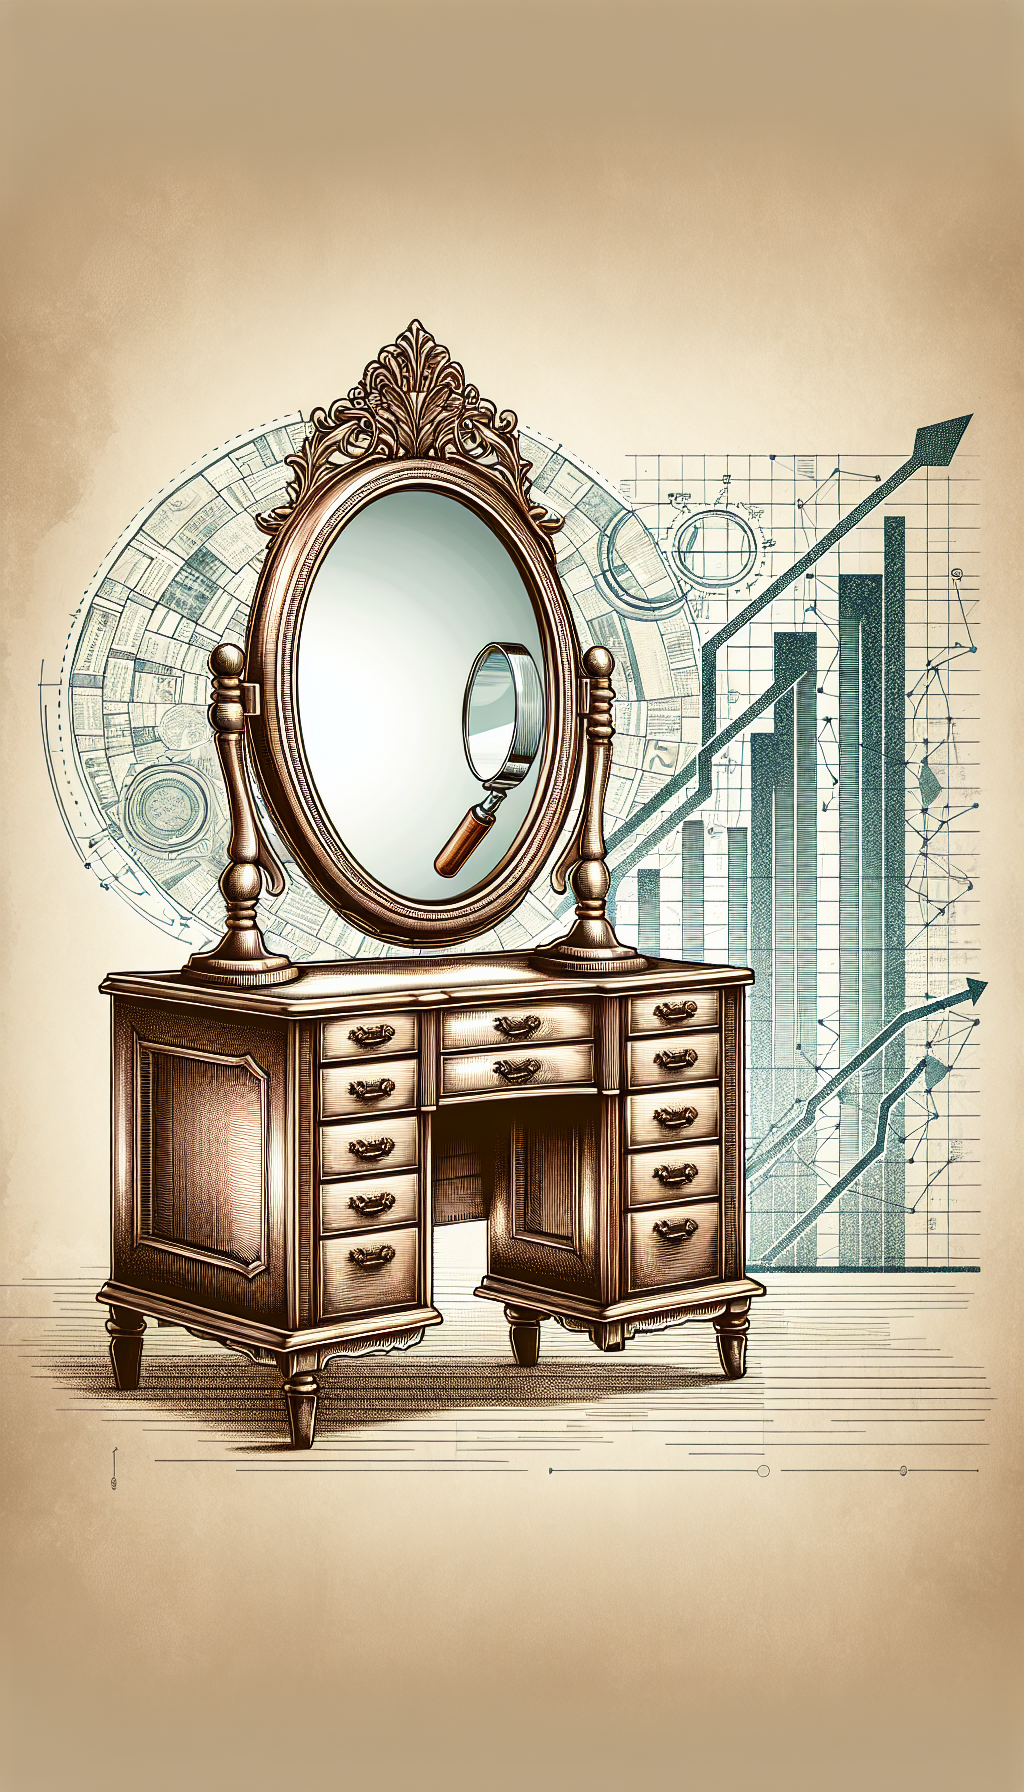 An illustration of a classic ornate antique vanity with a mirror stands prominently in the foreground, with a background mosaic of faded newspaper clippings and stock graphs depicting rising market trends. A magnifying glass hovers over the vanity, symbolizing the assessment of its value, while a vector line in the shape of an upward arrow reflects its growing demand.